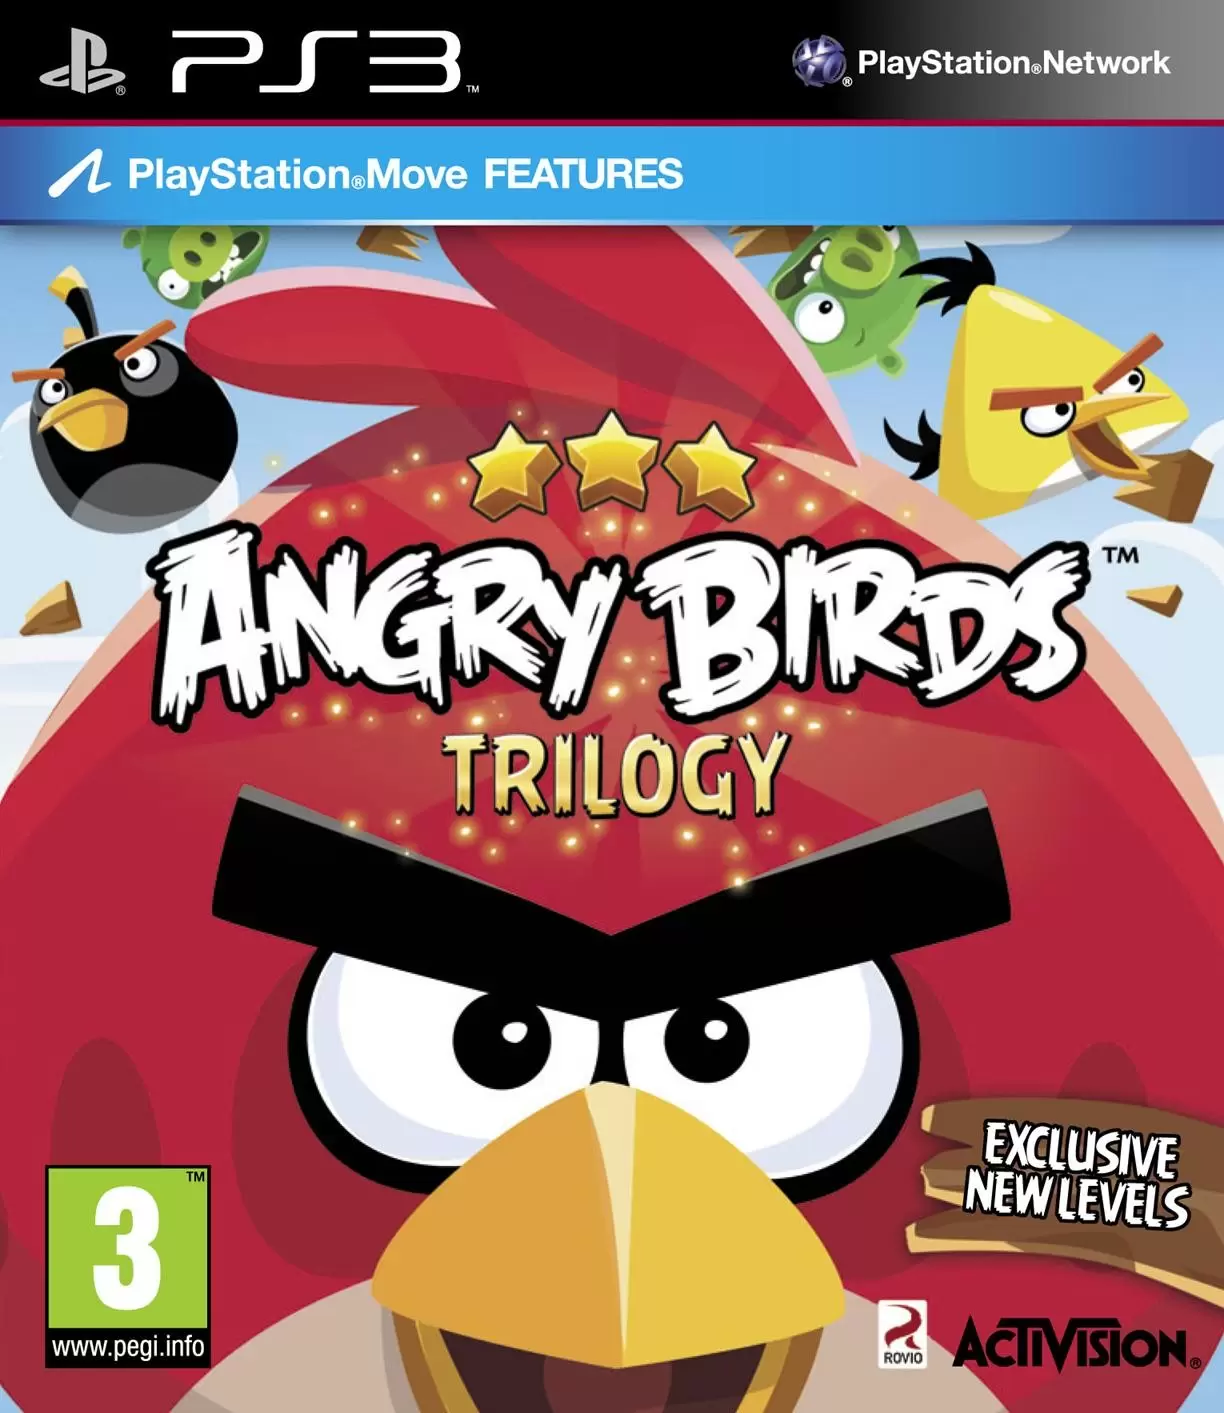 PS3 Games - Angry Birds Trilogy